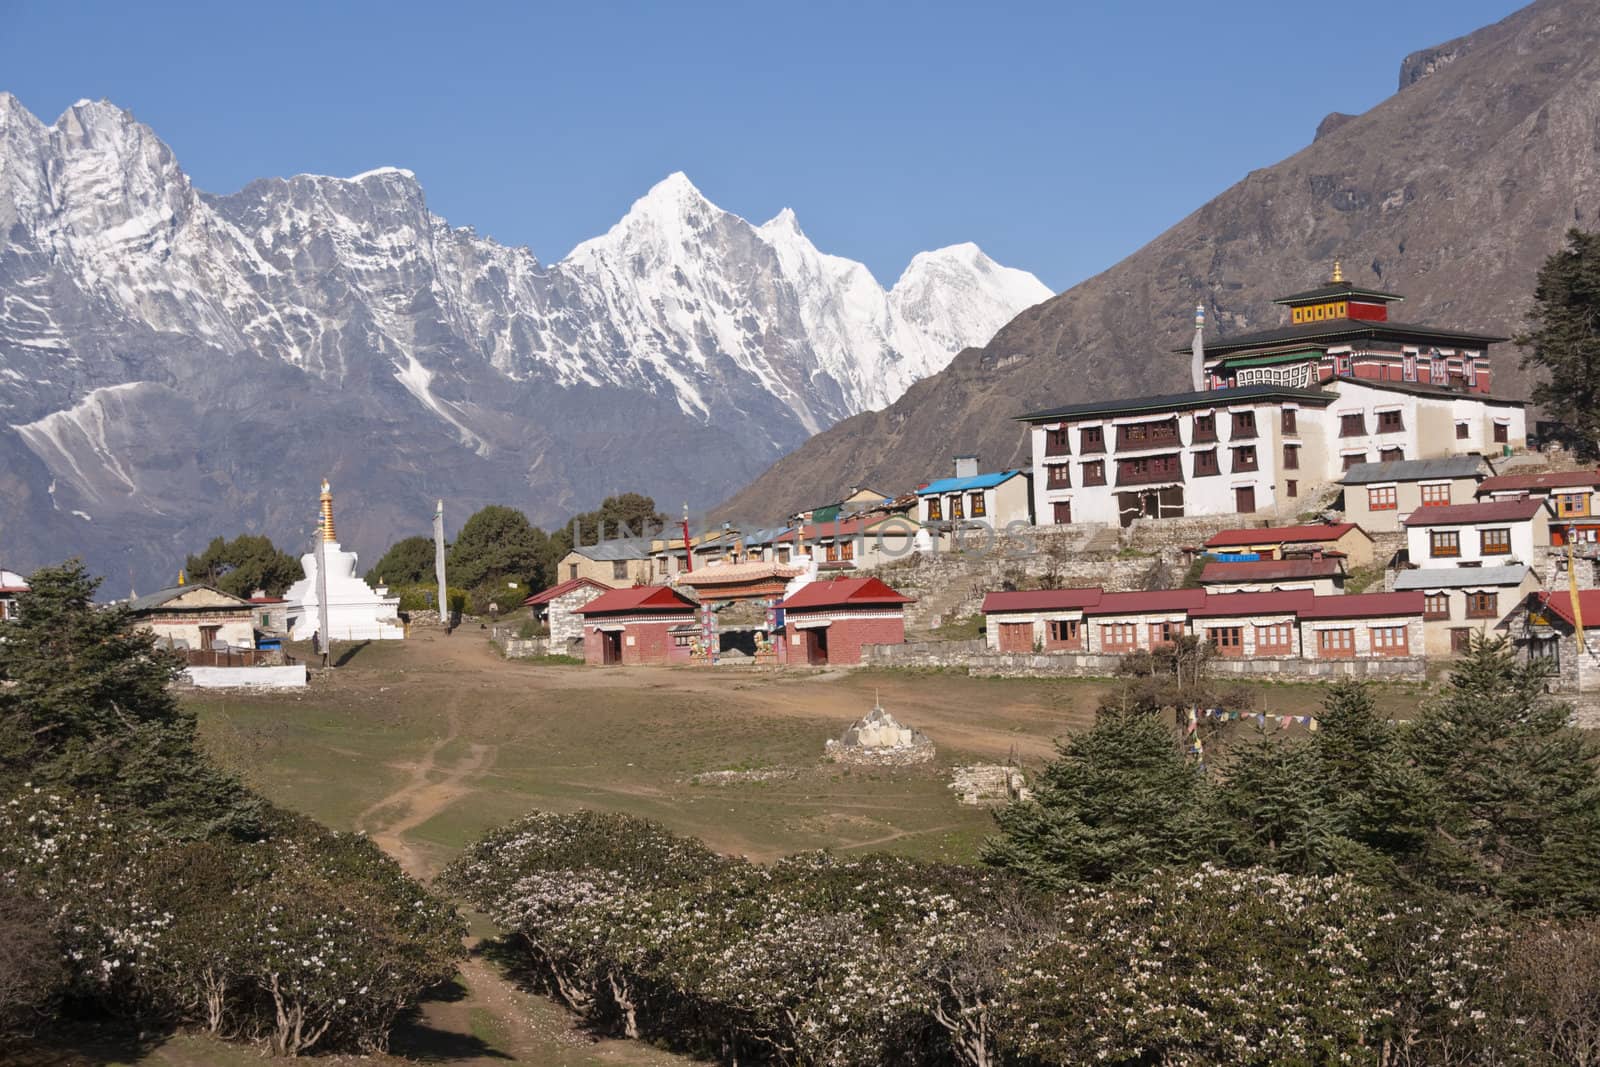 Buddhist Monastery at Tengboche (3860 Metres) on the trekking route to Everest Base Camp. Himalaya Mountains, Nepal.